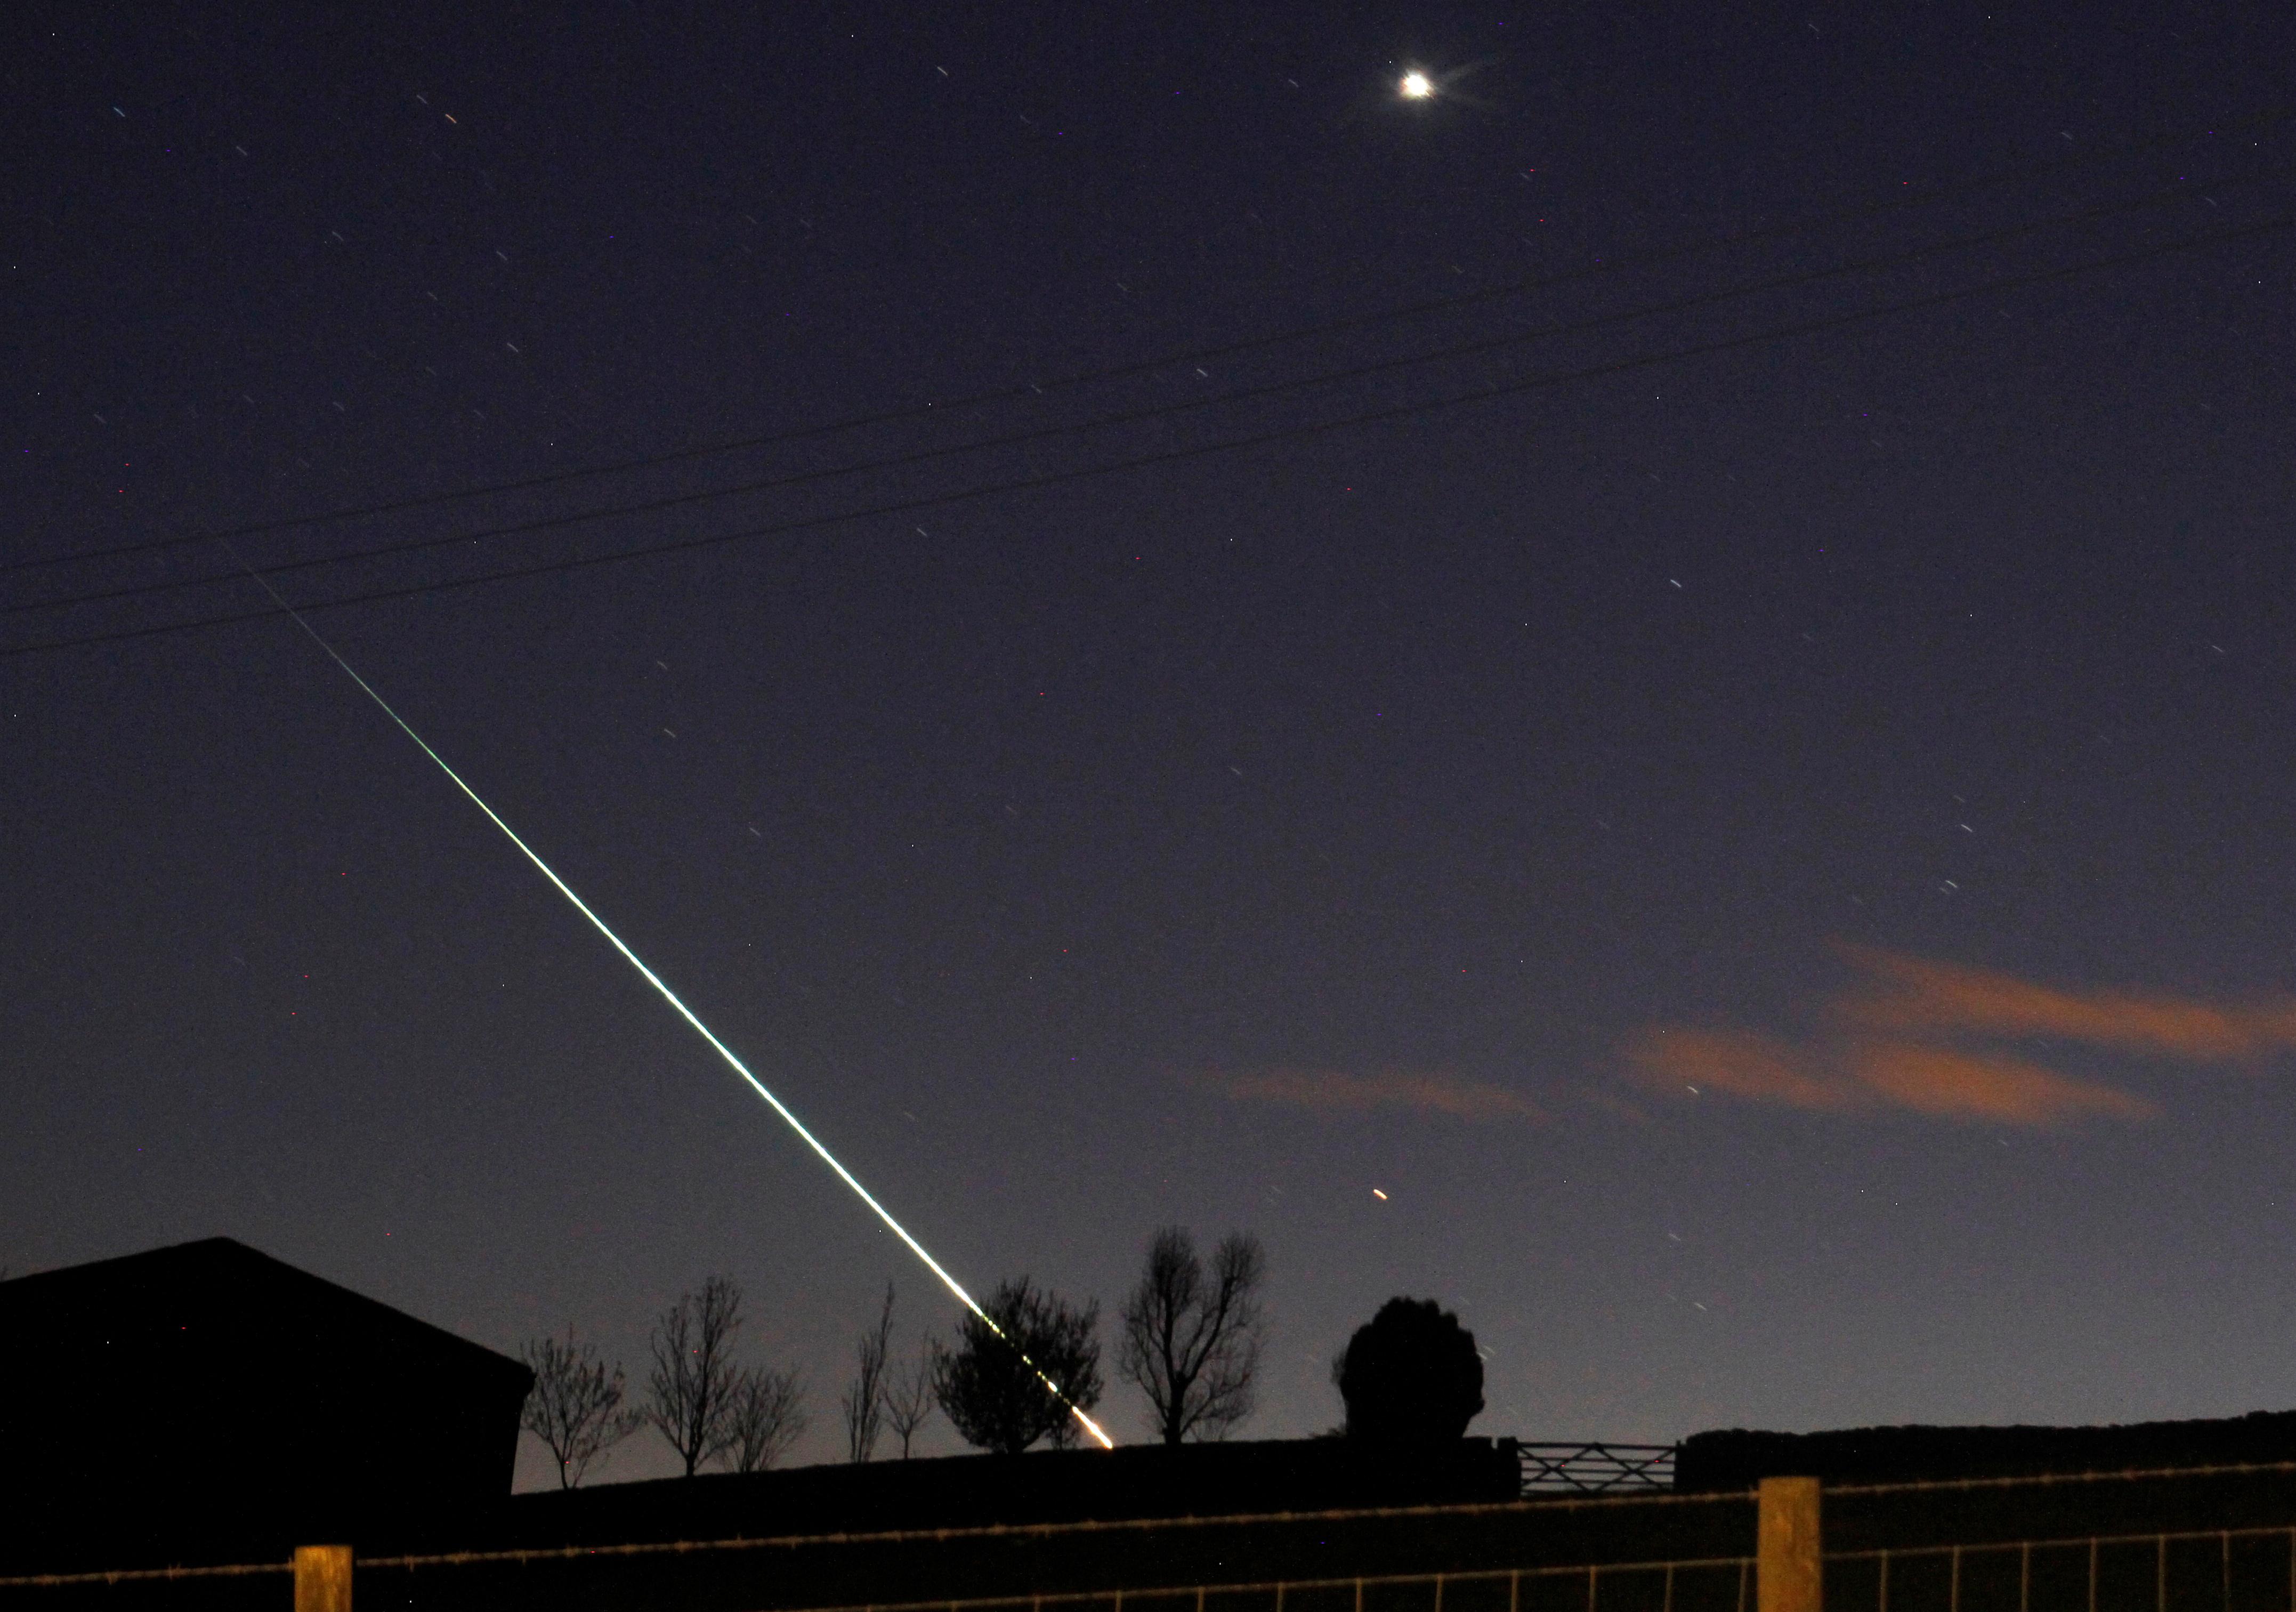 A meteorite creates a streak of light across the night sky over the North Yorkshire moors at Leaholm, near Whitby, northern England